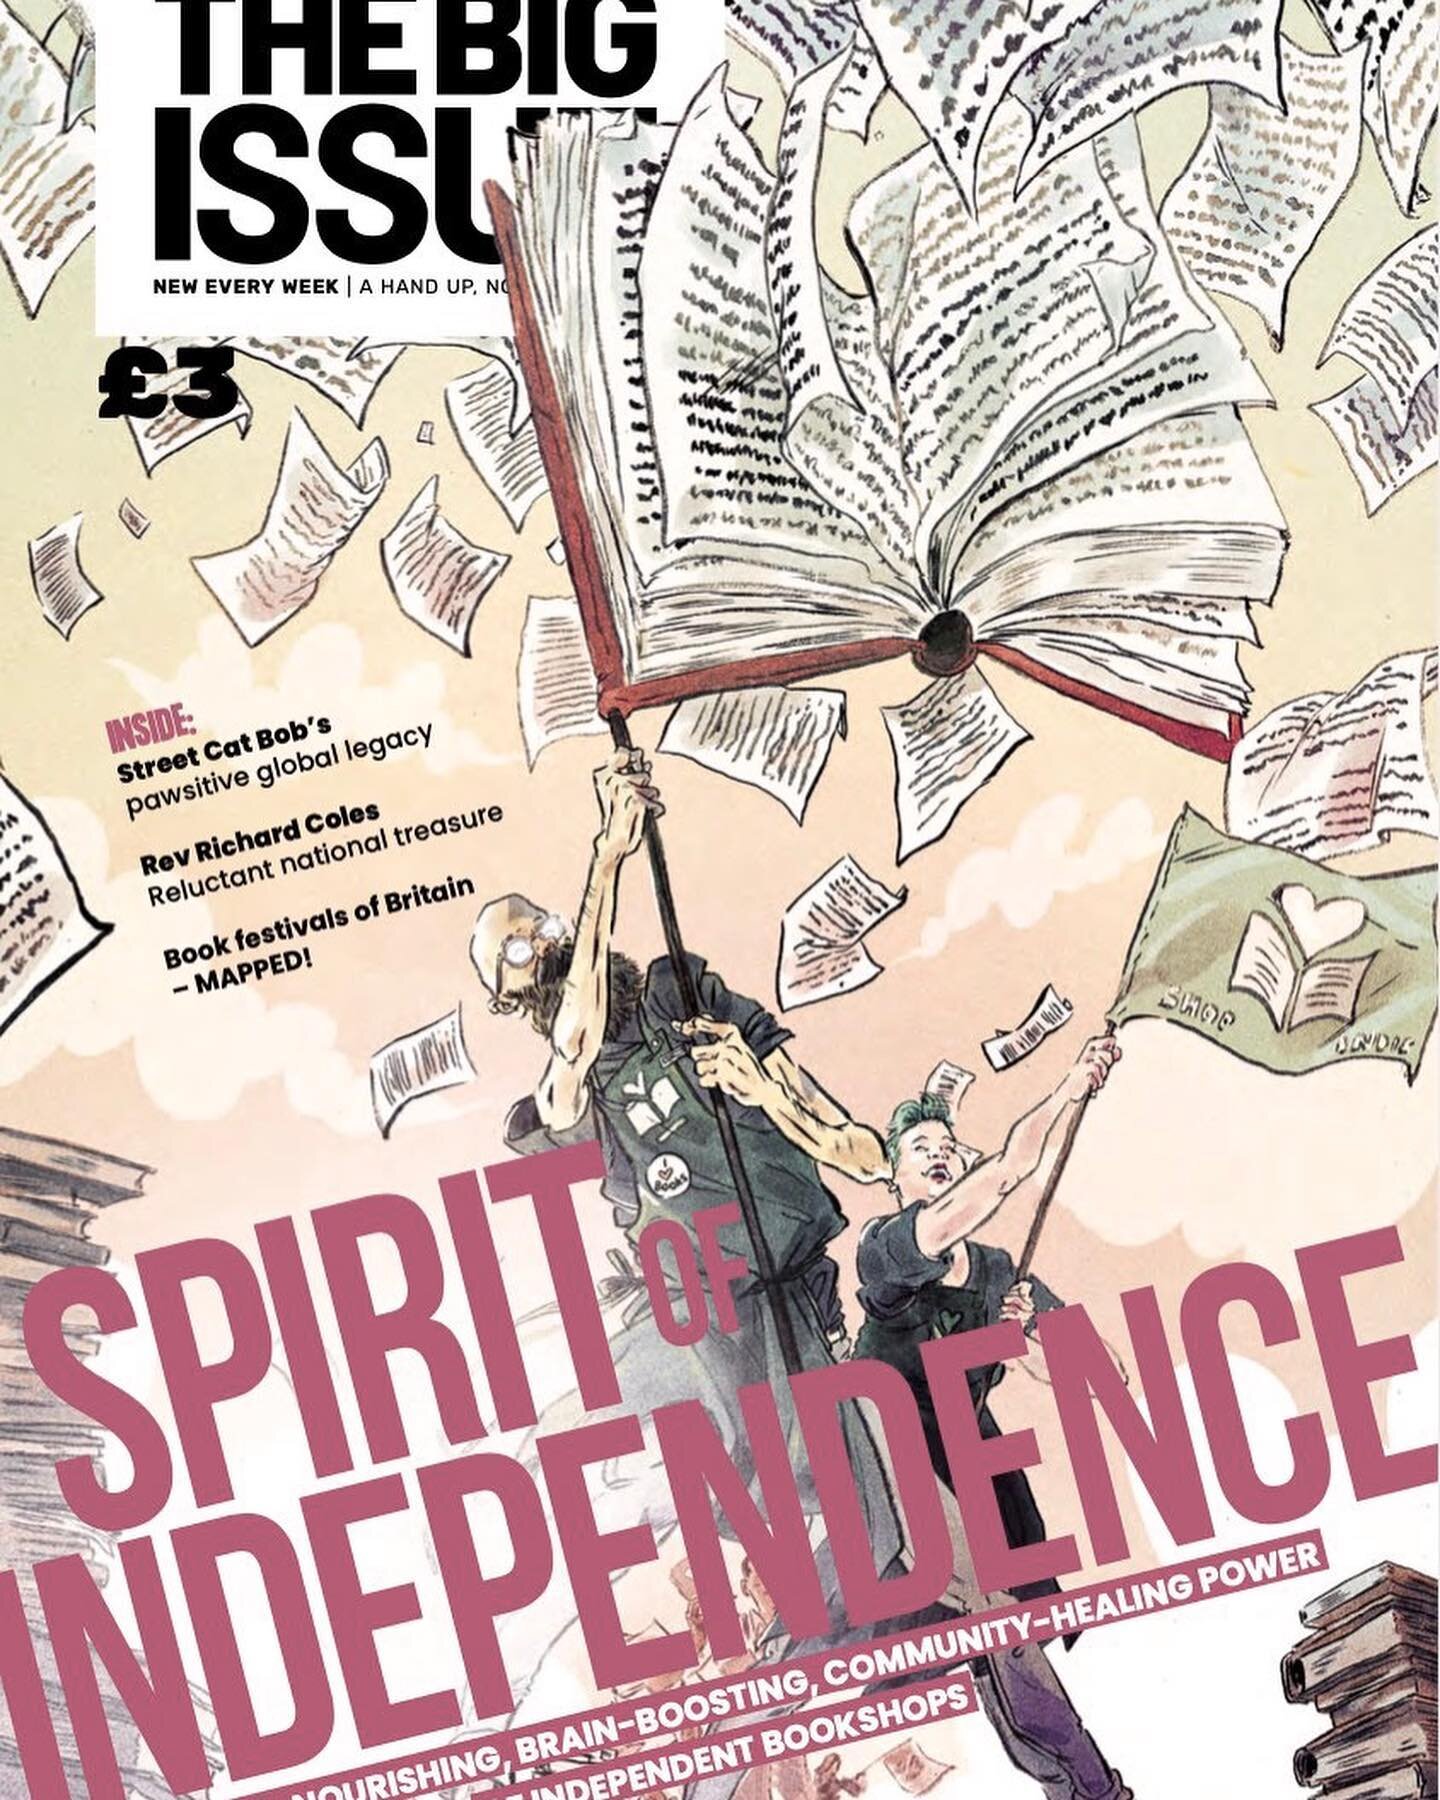 Very happy to have drawn the cover #illustration for this weeks @bigissueuk. 

The issue is all about independent book shops and publishers, and the Sprit of Independence!

Keep an eye out for it with you local vendor!

#editorial #illustrator #thebi